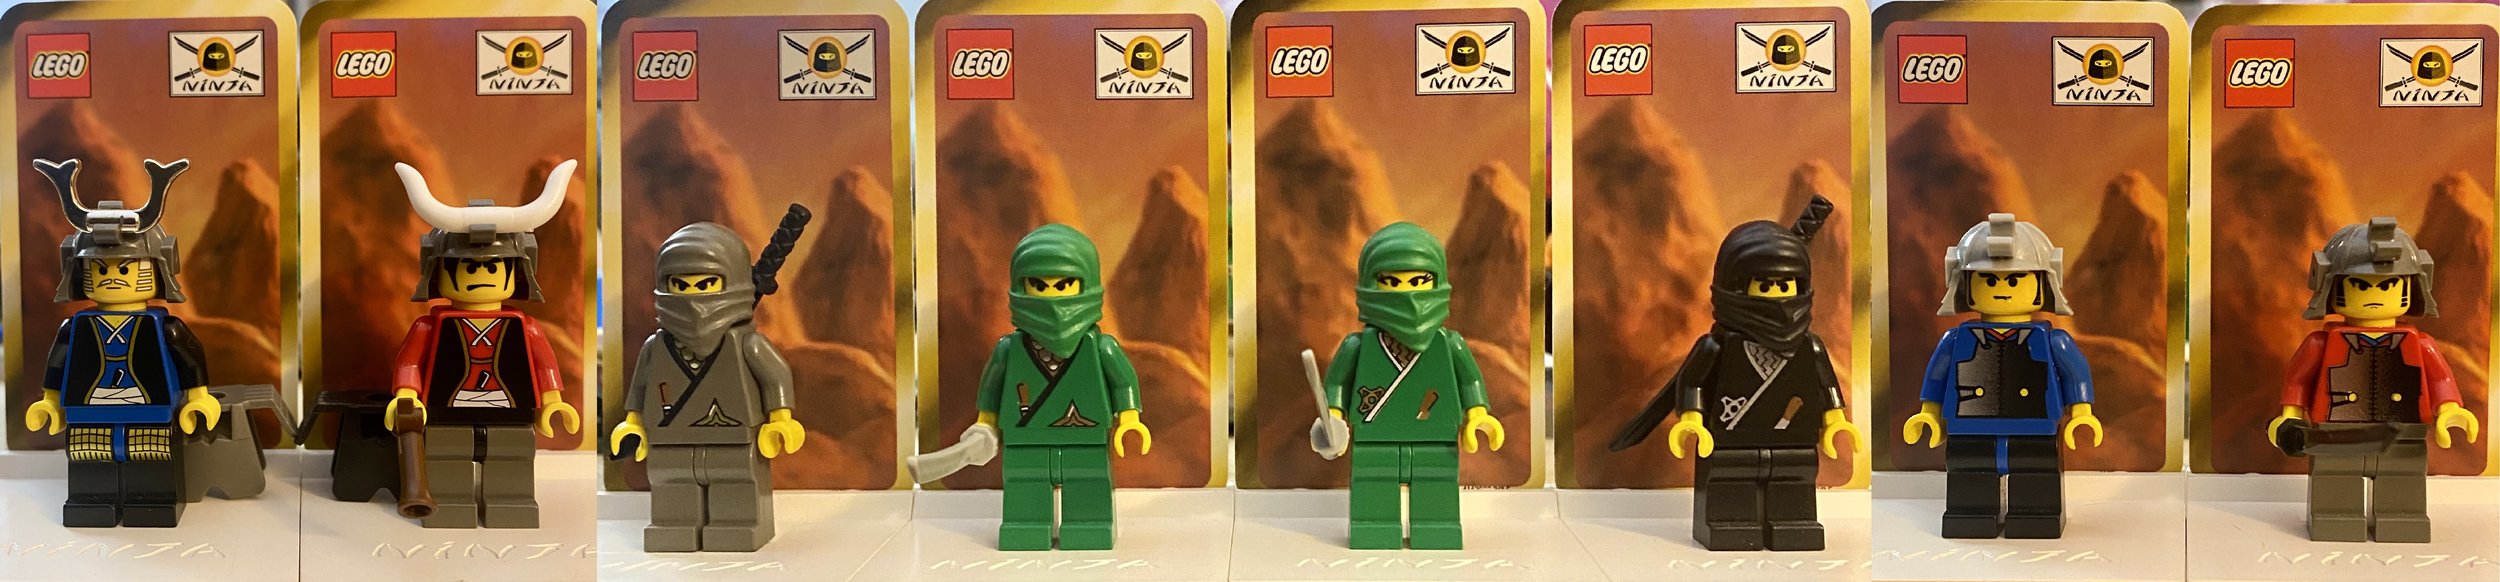 LEGO's Forgotten Collectible Minifigures BrickNerd - All things LEGO and the LEGO fan community